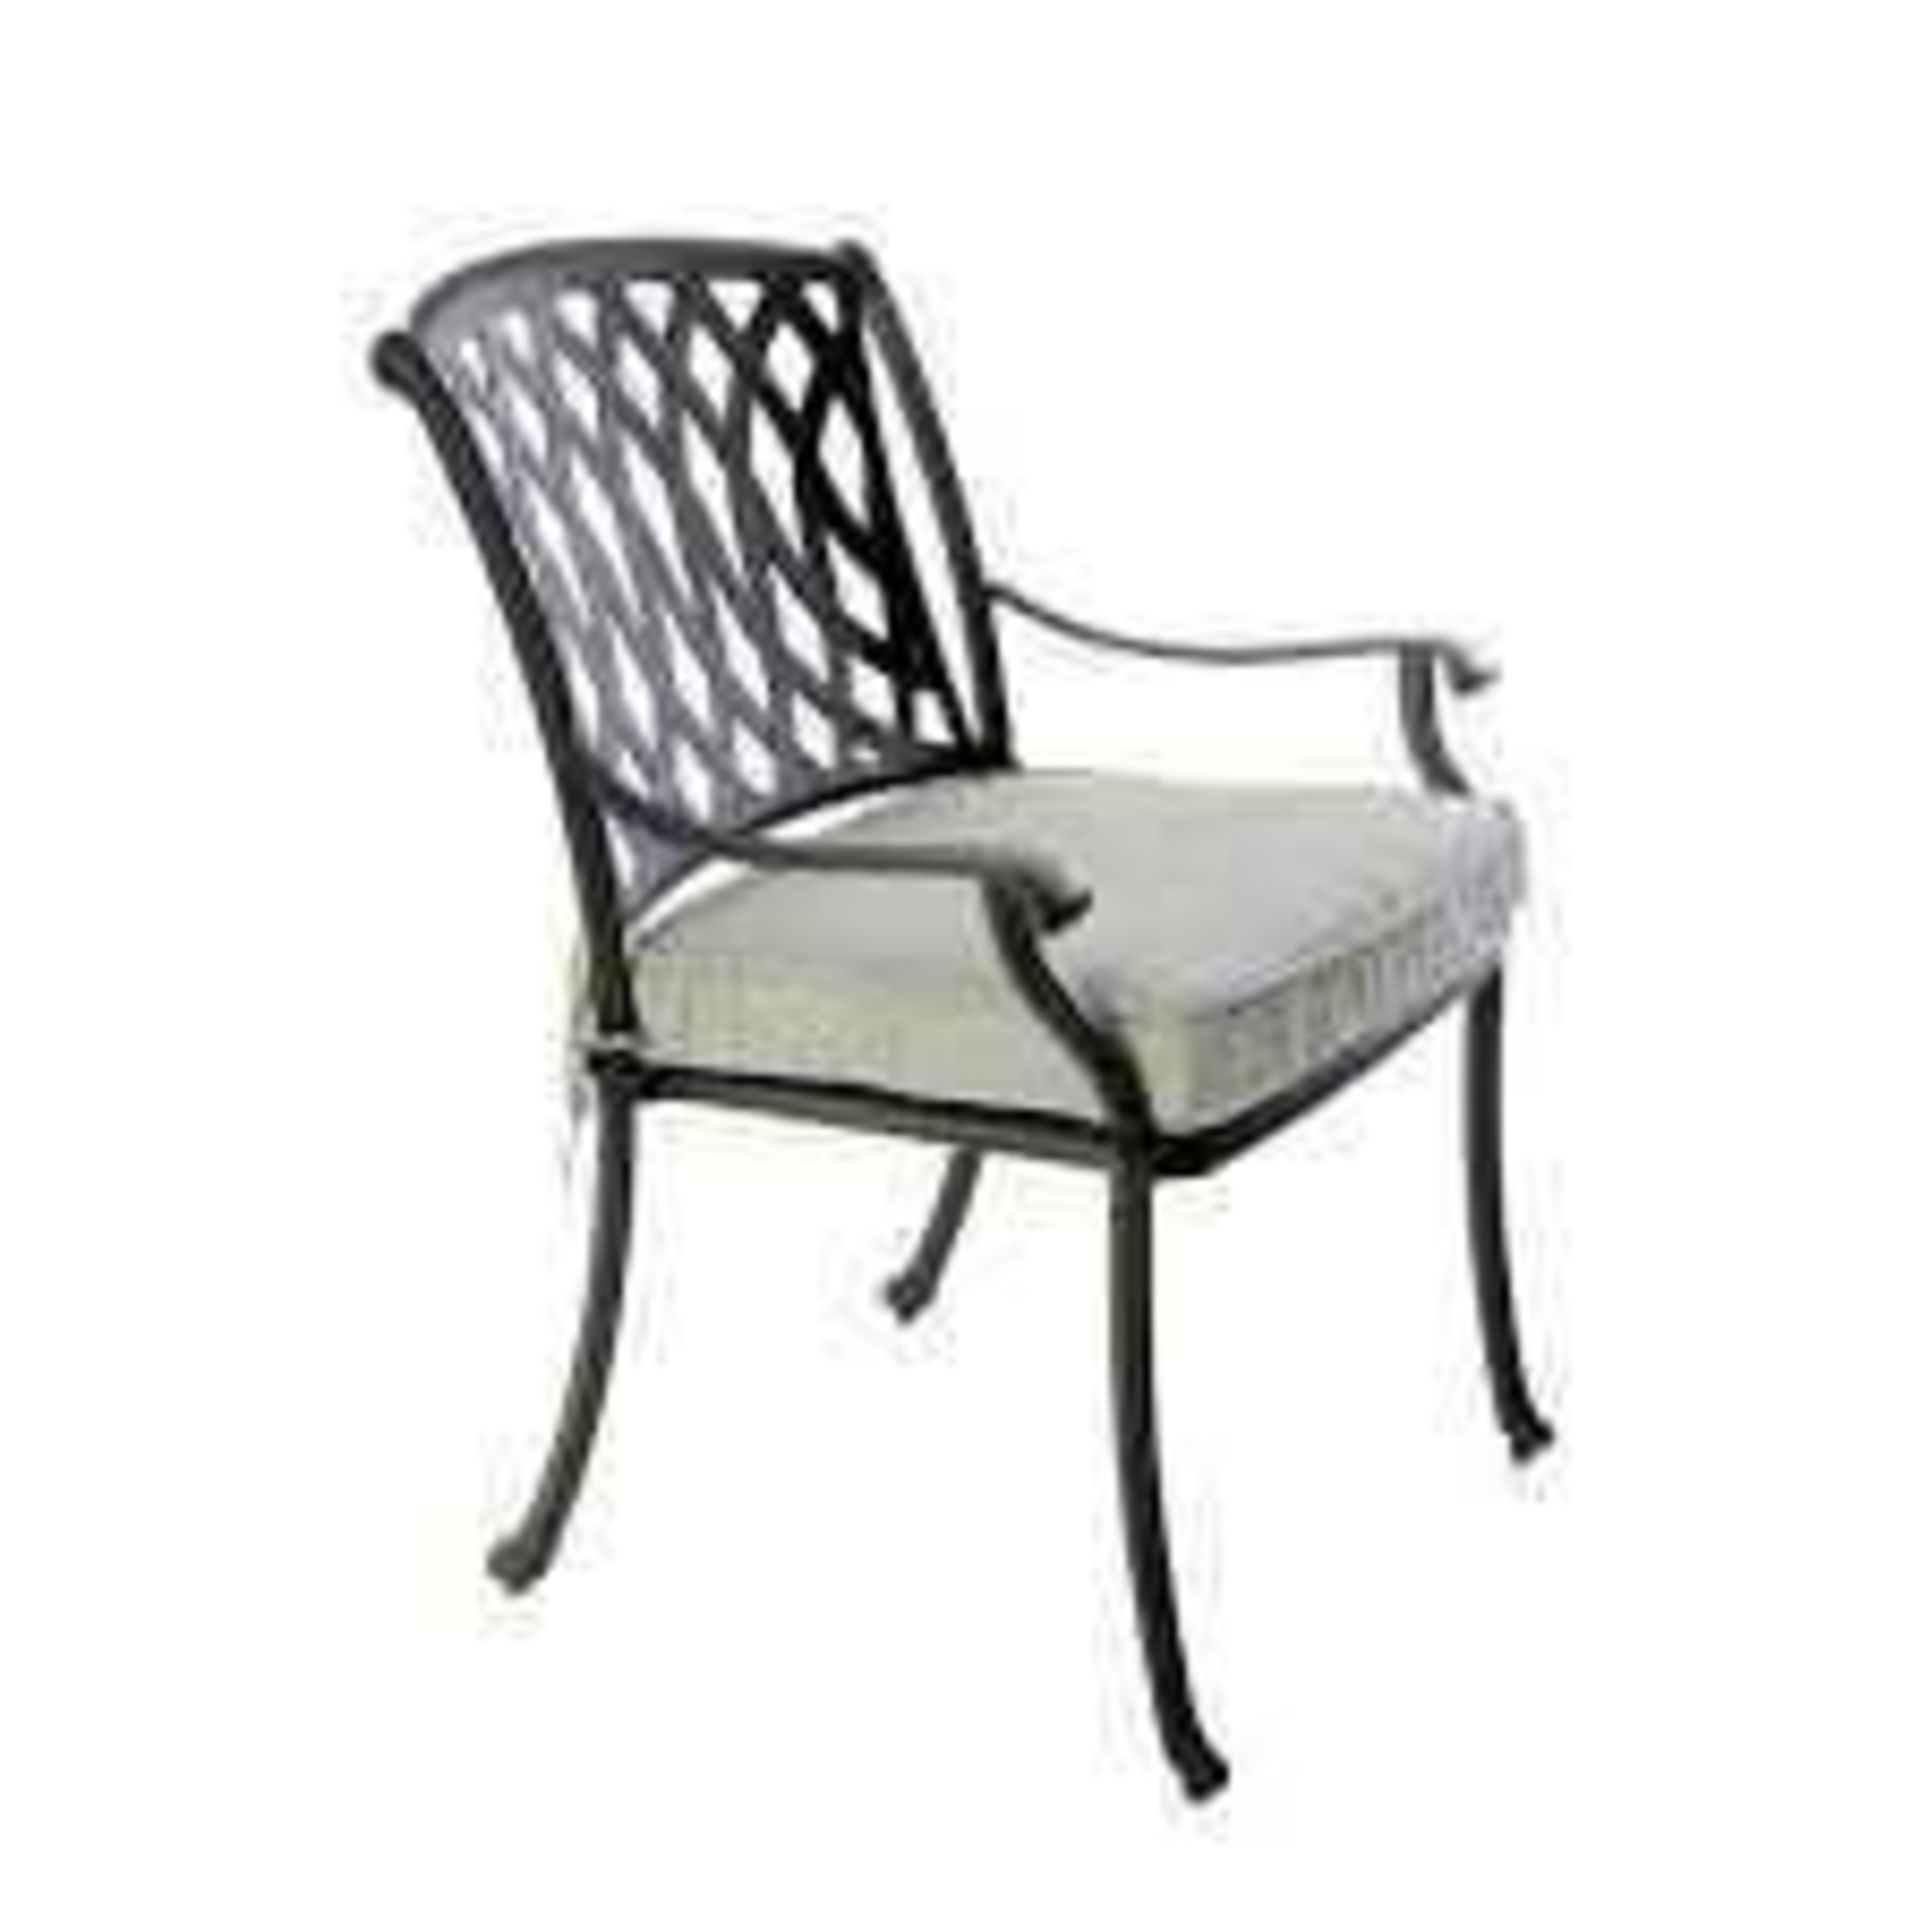 RRP £110 Unboxed Metal Mesh Garden Chair (Appraisals Available On Request) (Pictures For